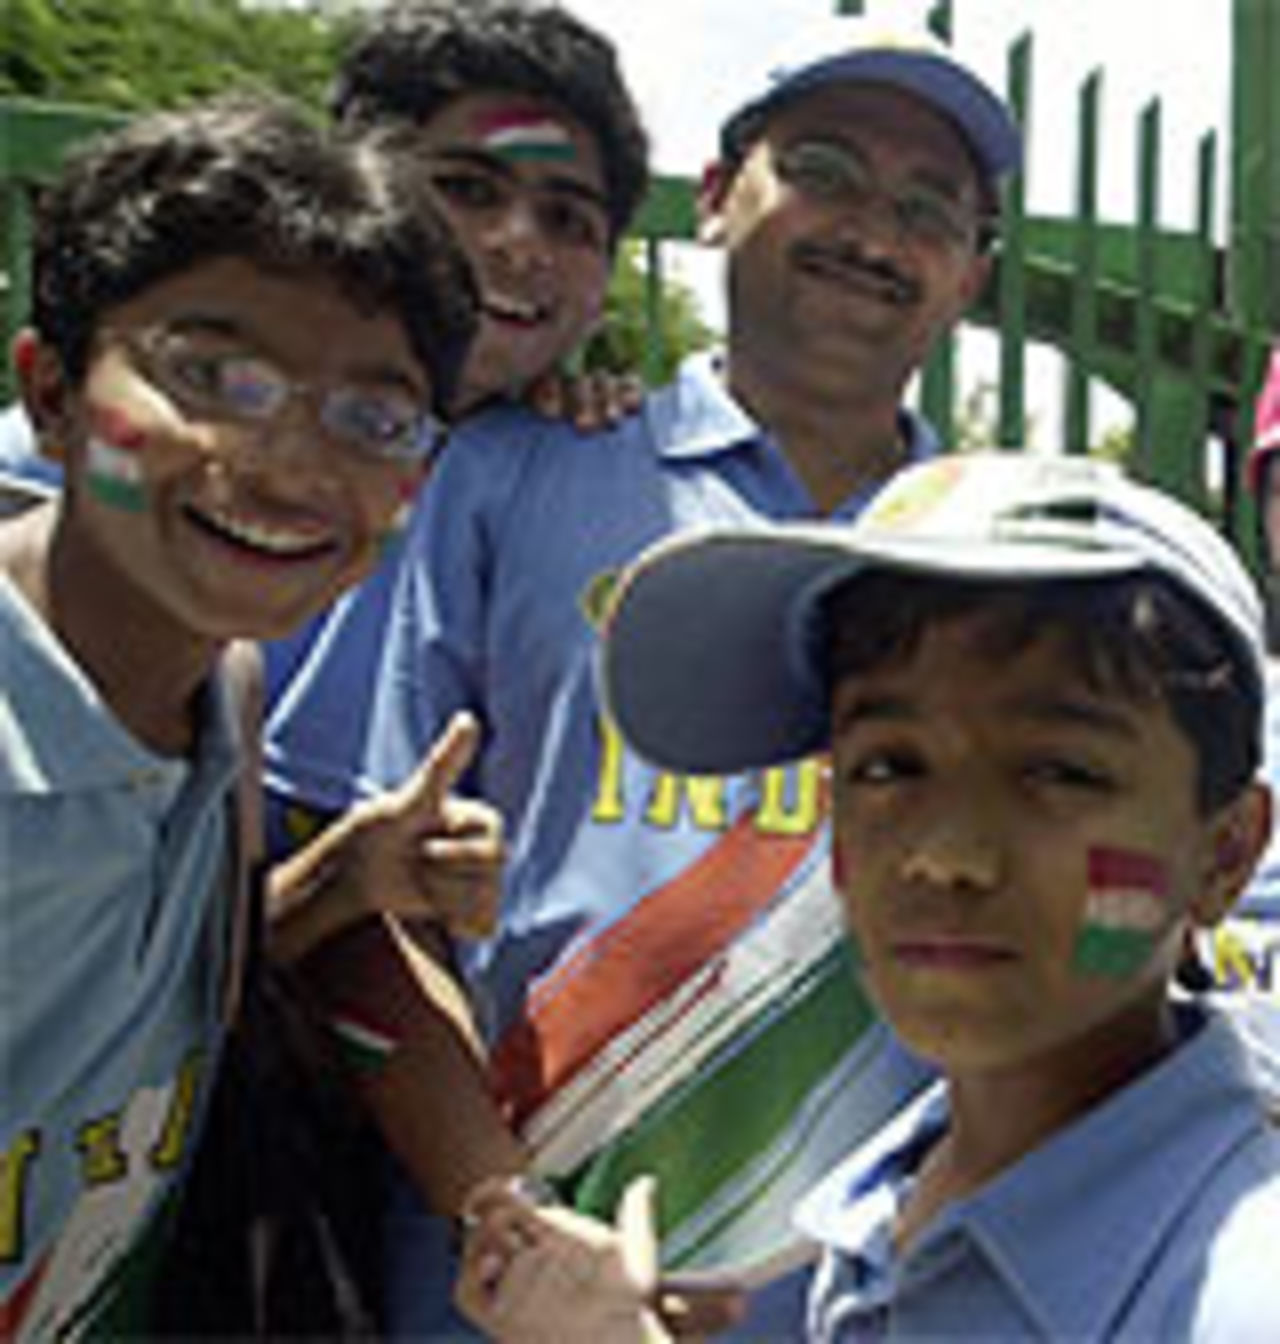 Indian fans at the Asia Cup final, August 1, 2004